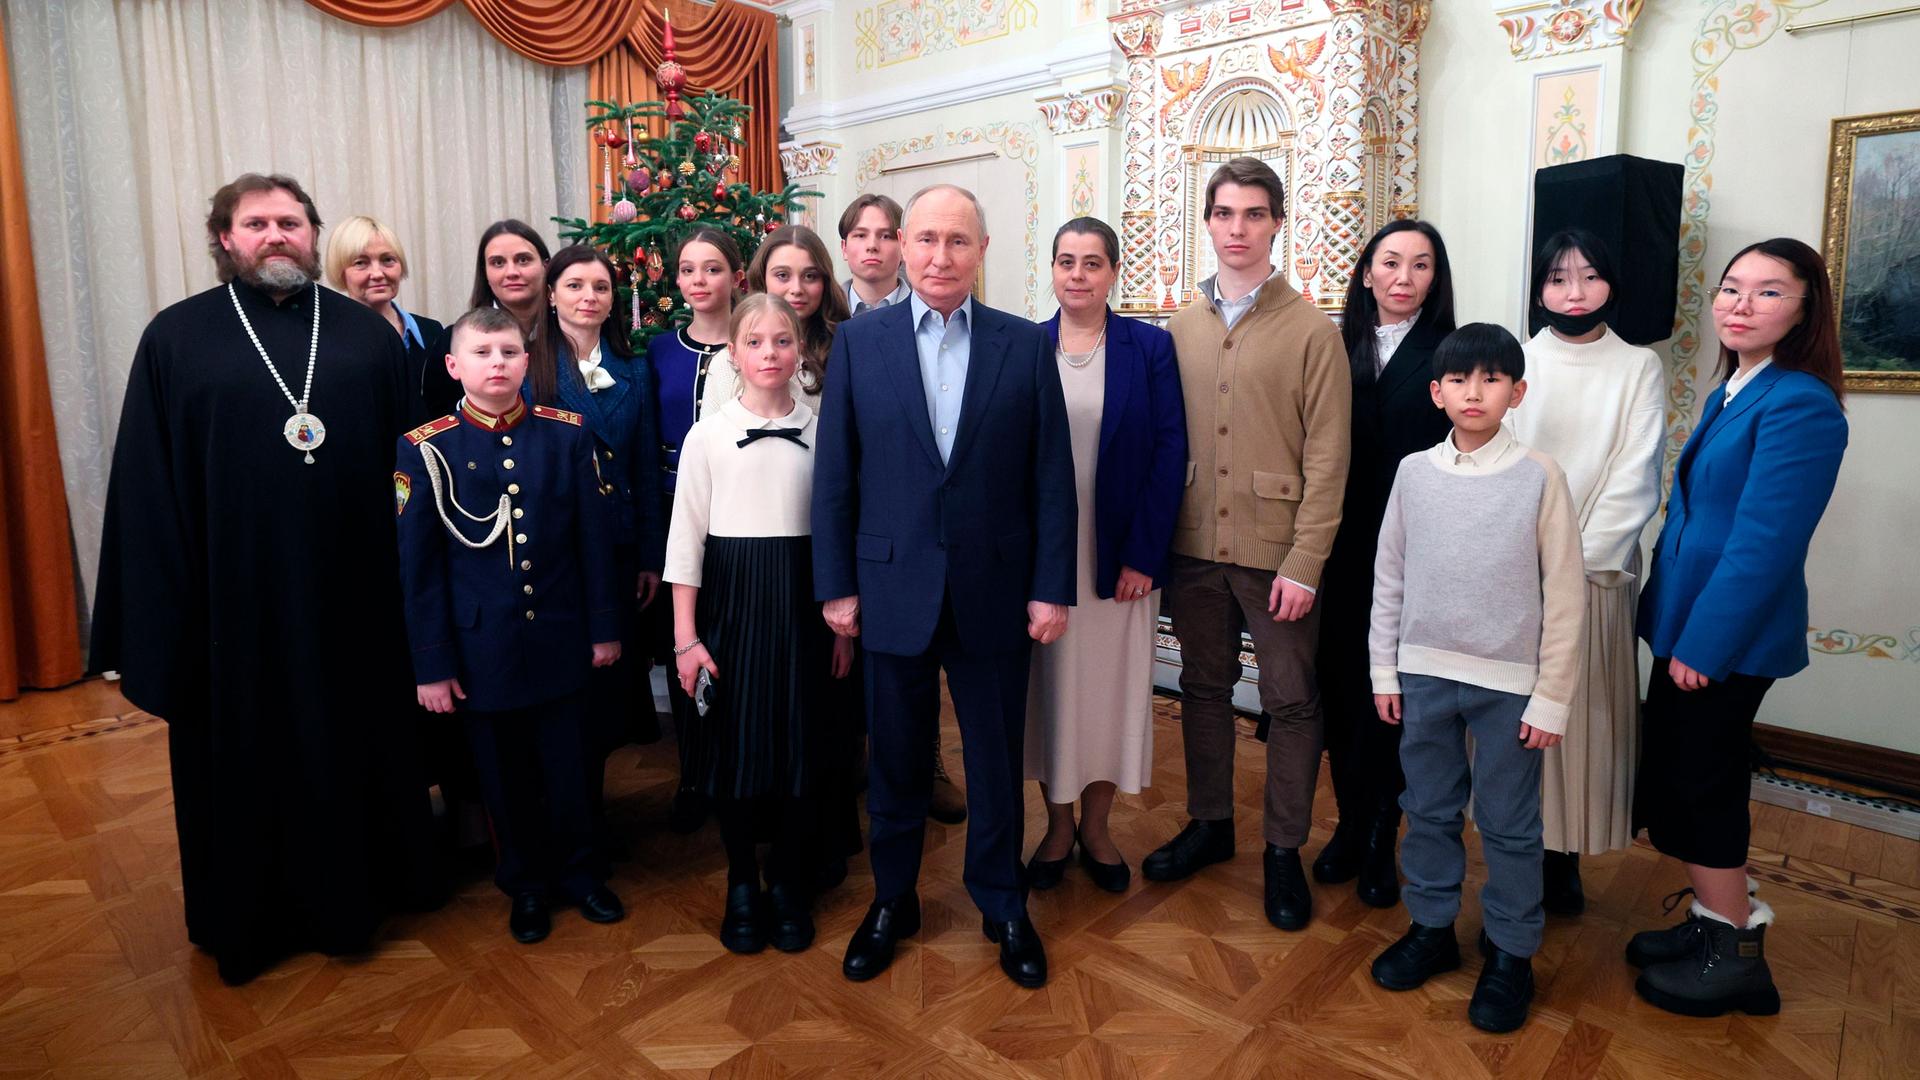 Russian President Vladimir Putin, center, and Russian Orthodox Archbishop of Odintsovo and Krasnogorsk Foma (Nikolay Mosolov), left, pose for a photo with the families of military personnel who died in combat.